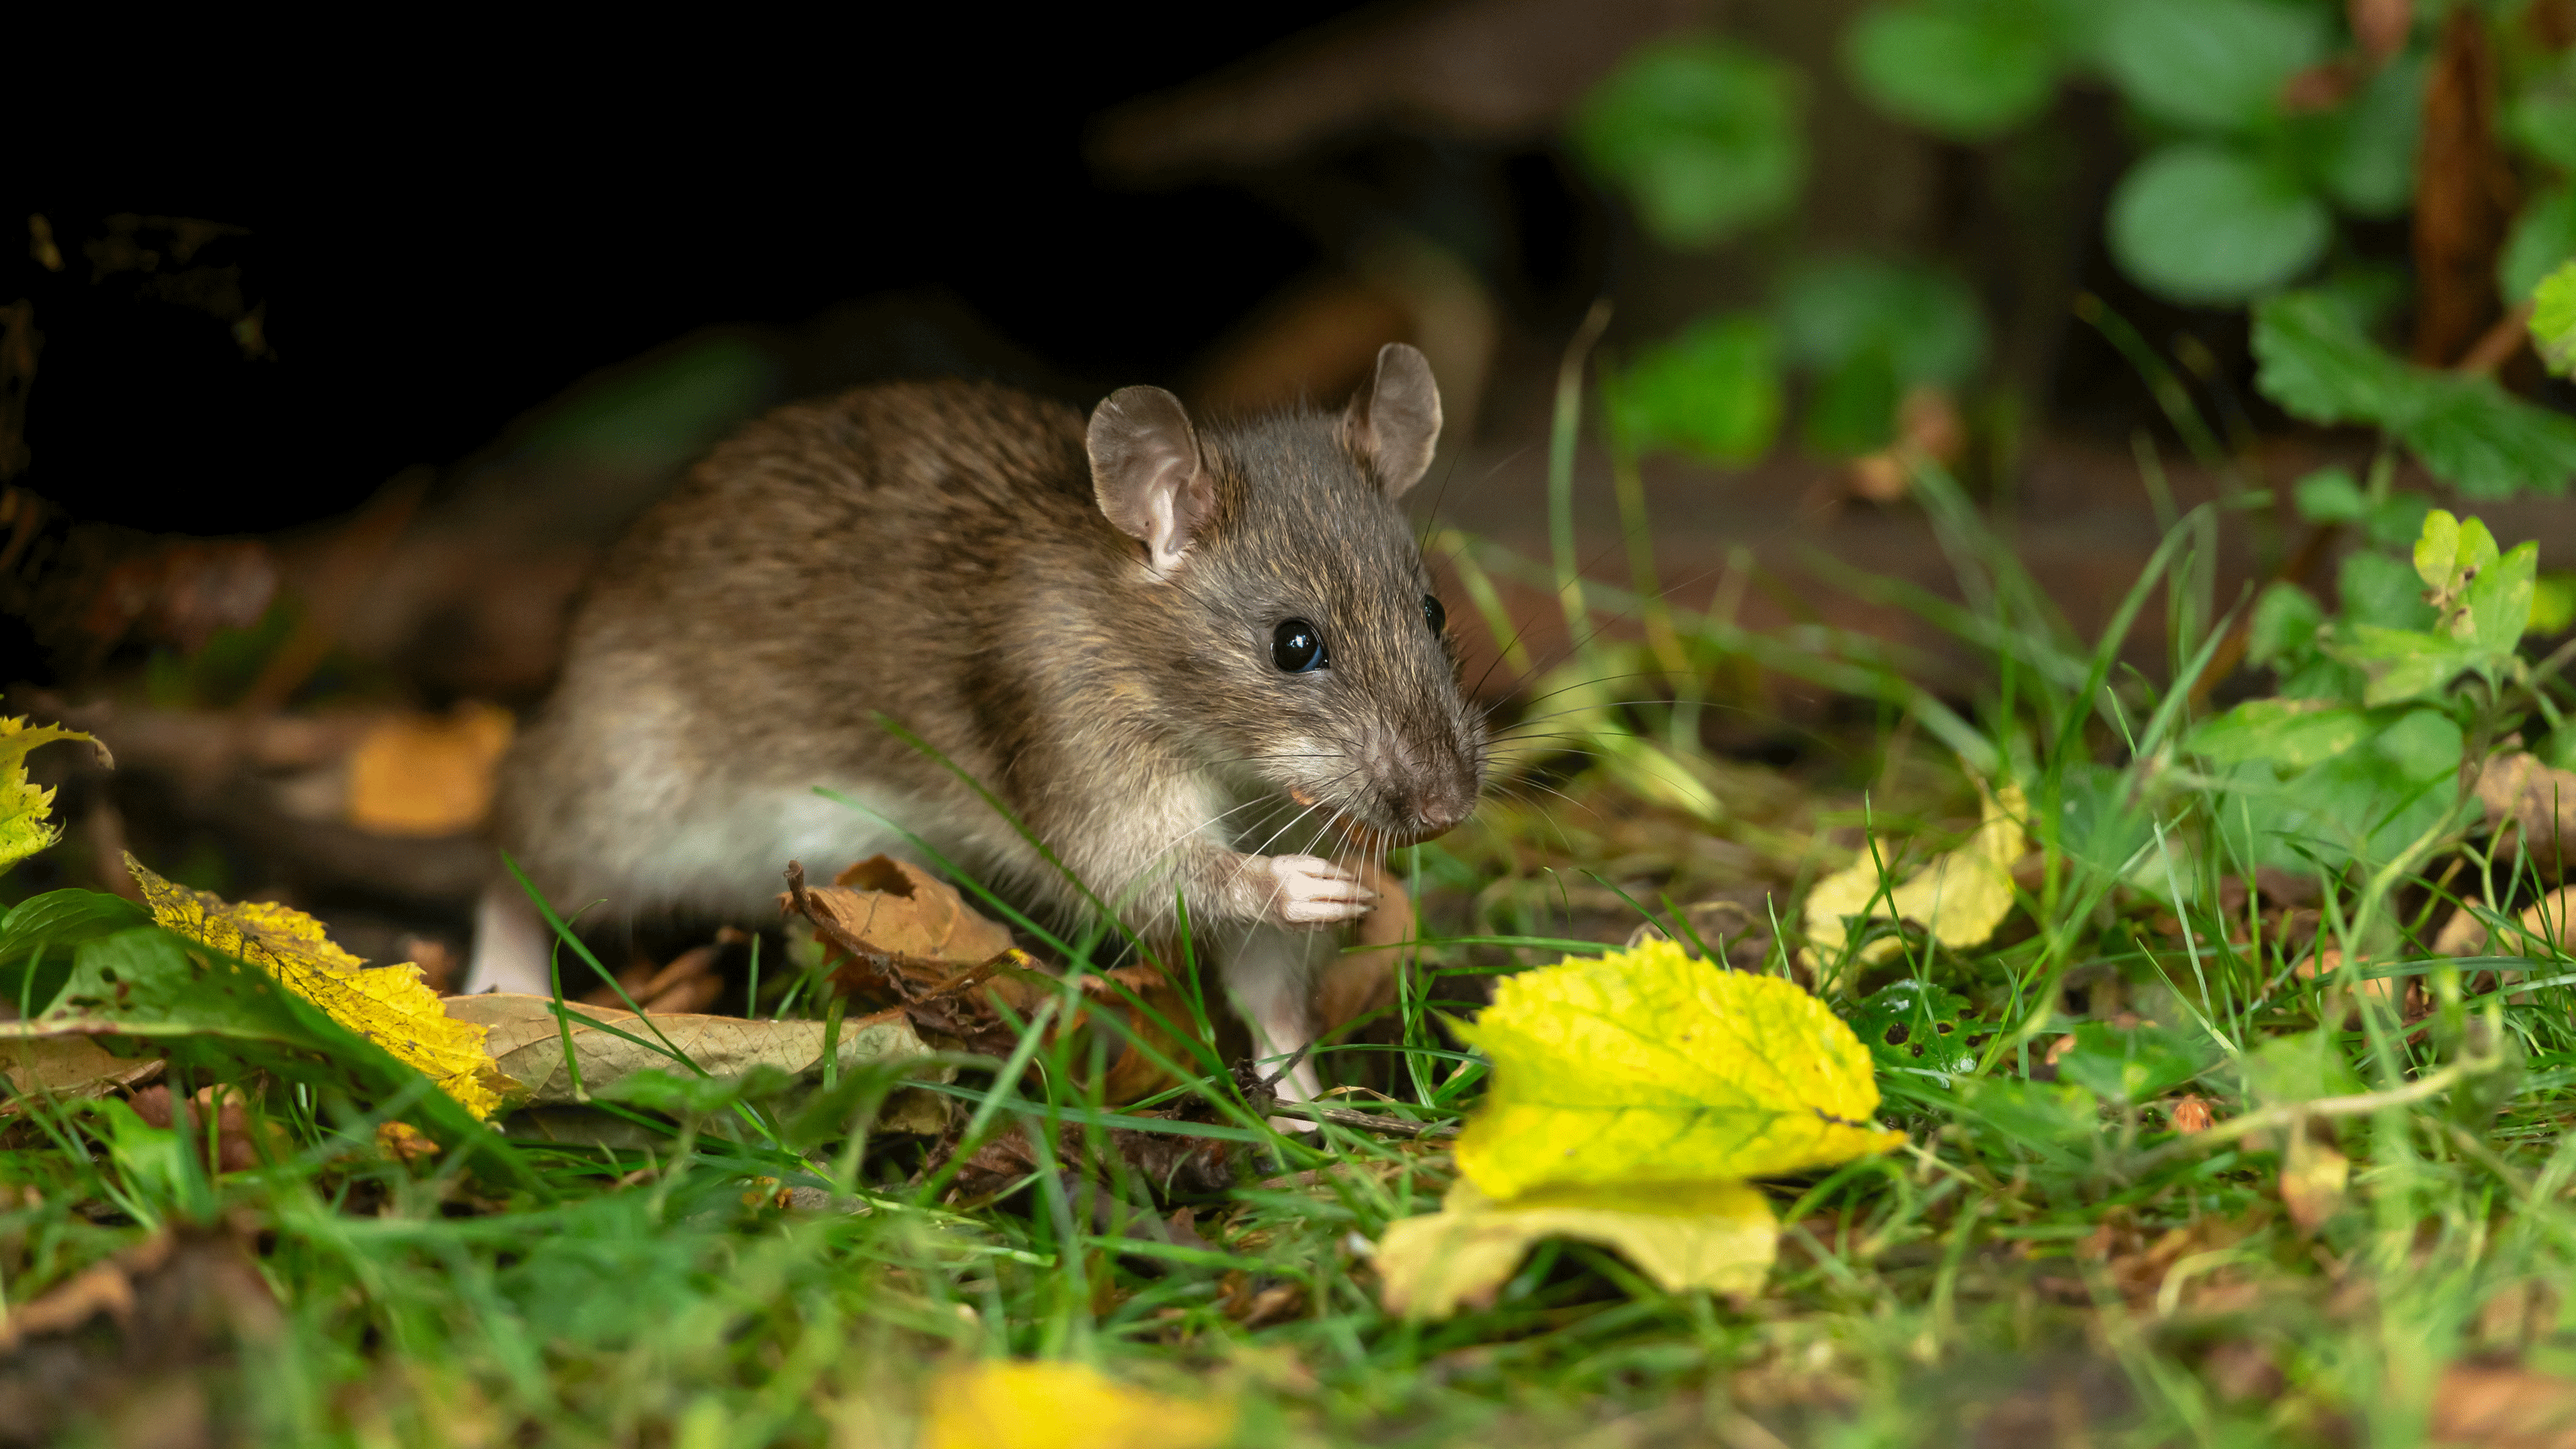 How to Get Rid of Mice in the House - DIY Pest Control